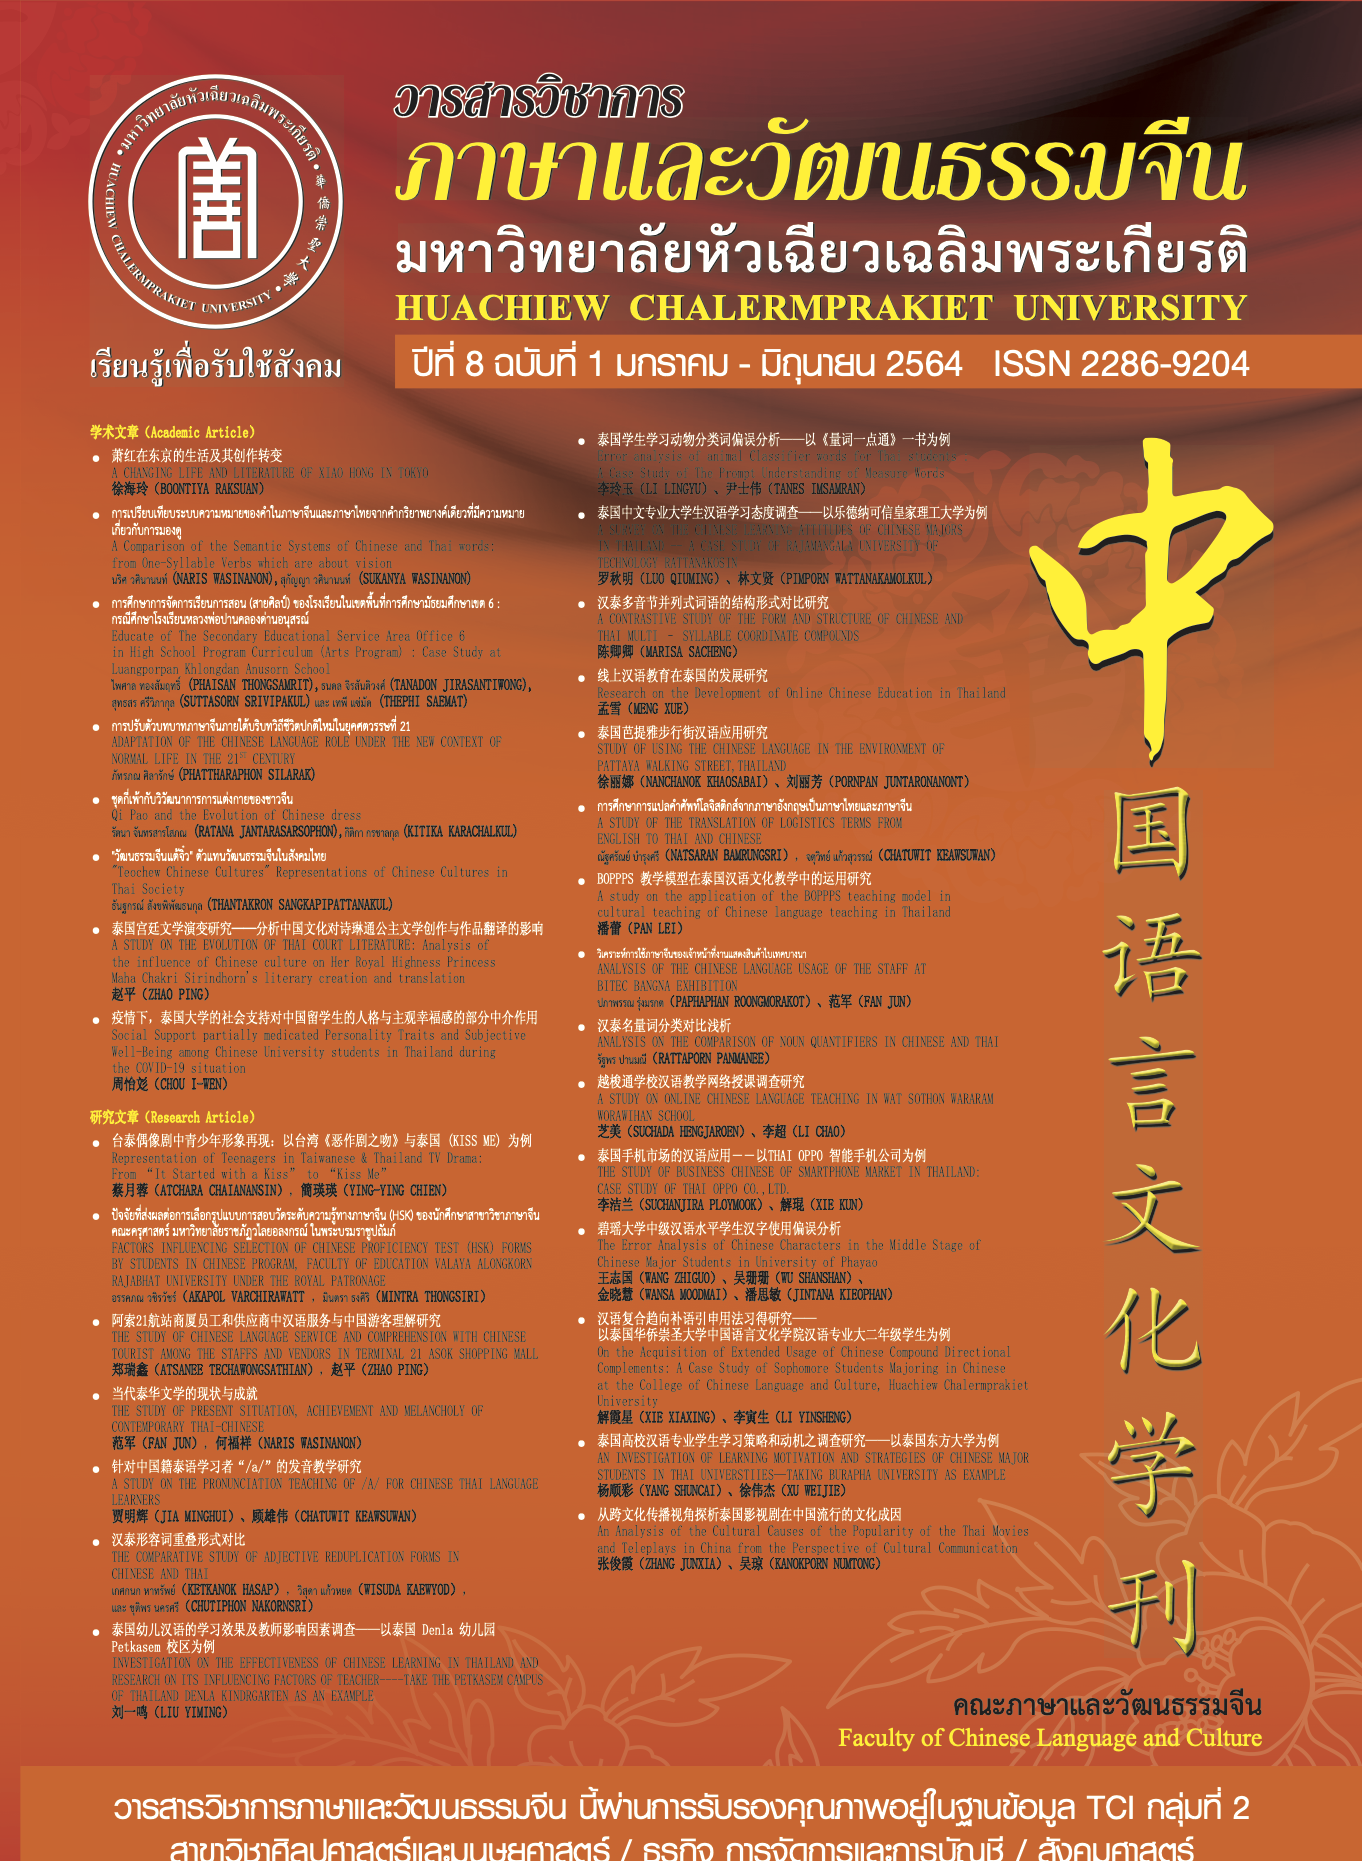 					View Vol. 8 No. 1 (2021): Faculty of Chinese Language and Culture
				